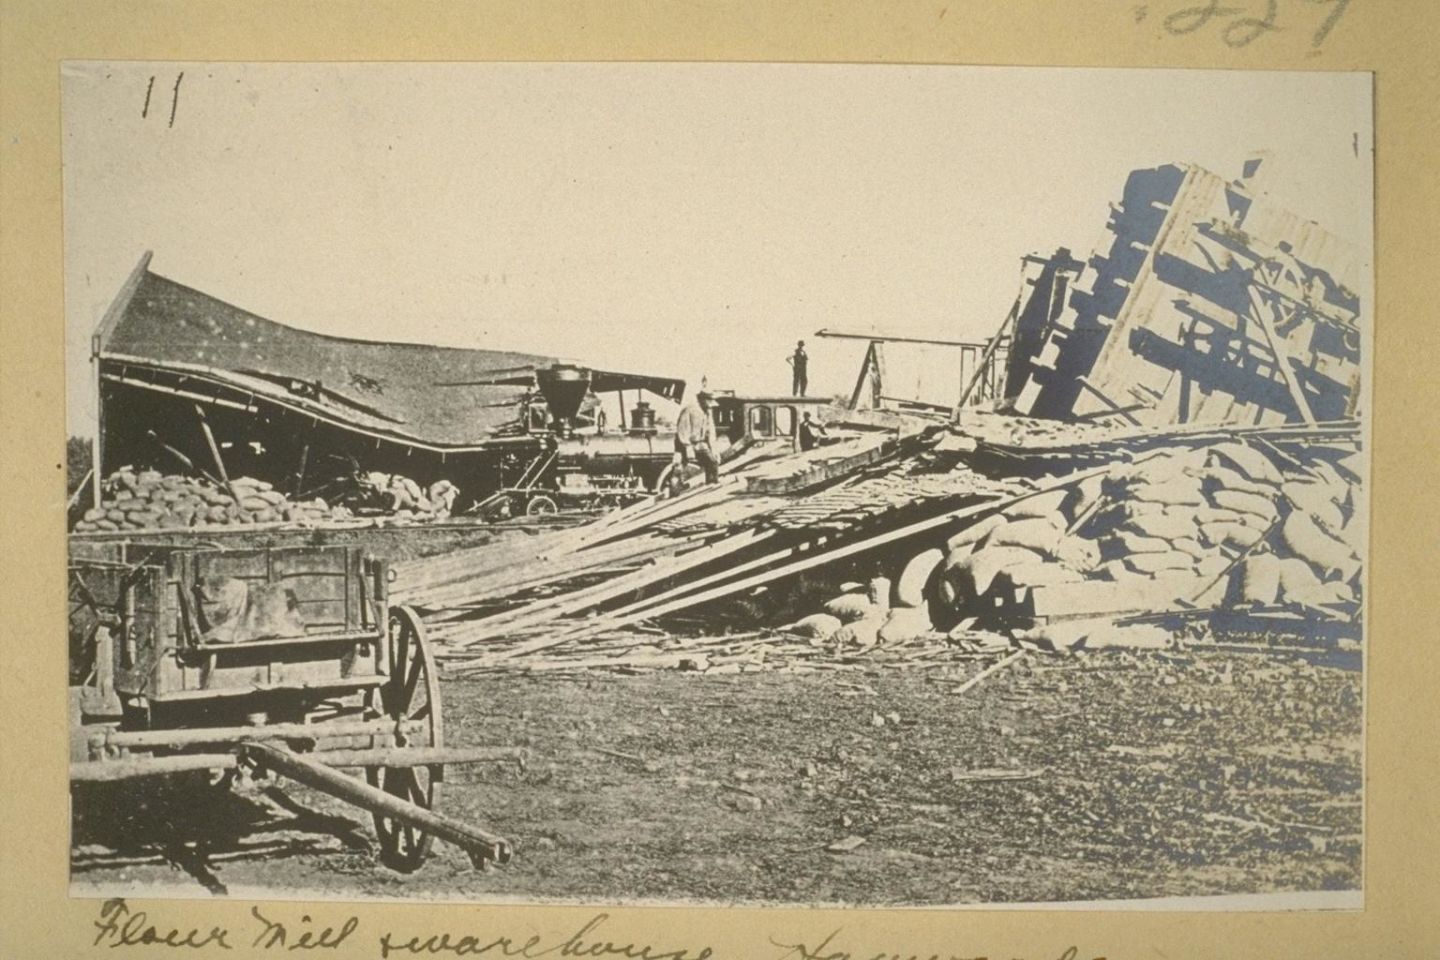 A flour mill destroyed by an earthquake on the Hayward Fault on October 21, 1868.